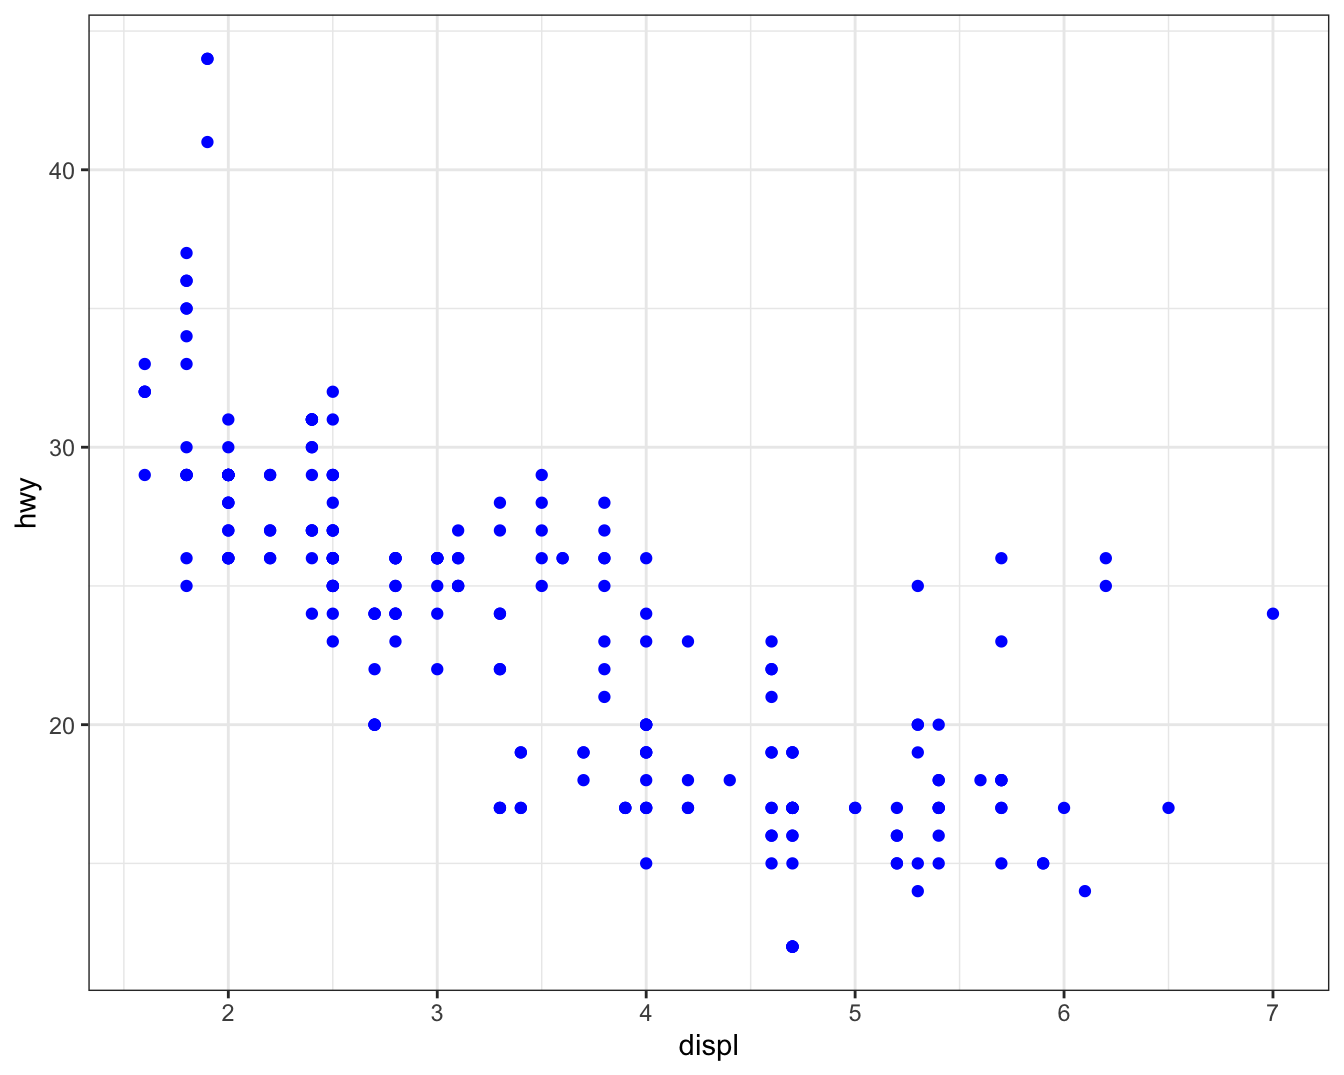 Scatterplot of highway fuel efficiency versus engine size of cars
that shows a negative association. All points are blue.